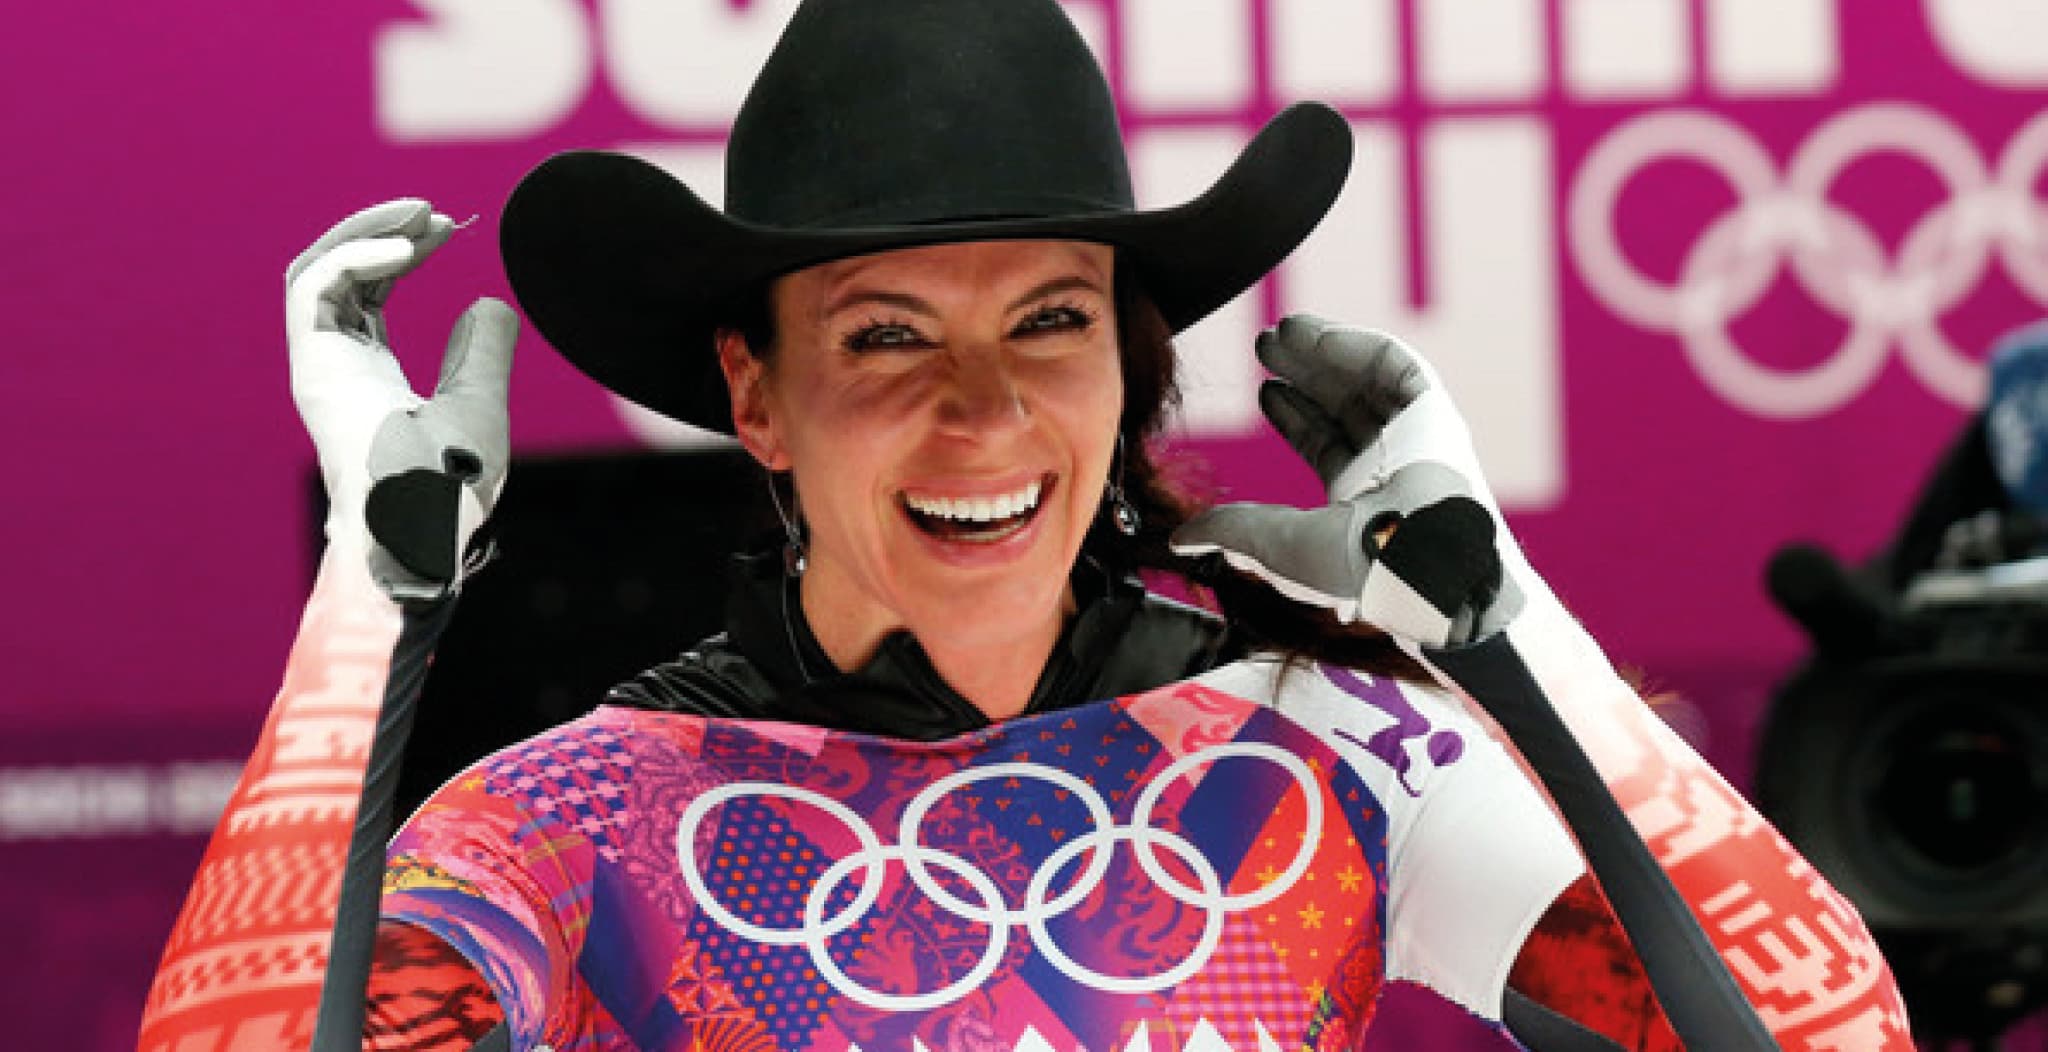 YOU Streamz and EQU Streamz endorsed by Melissa Hollingsworth for Streamz recovery and rehabilitation in both her and her horses. Image of Melissa at Olympics representing Canada in Winter Olympics Sochi 